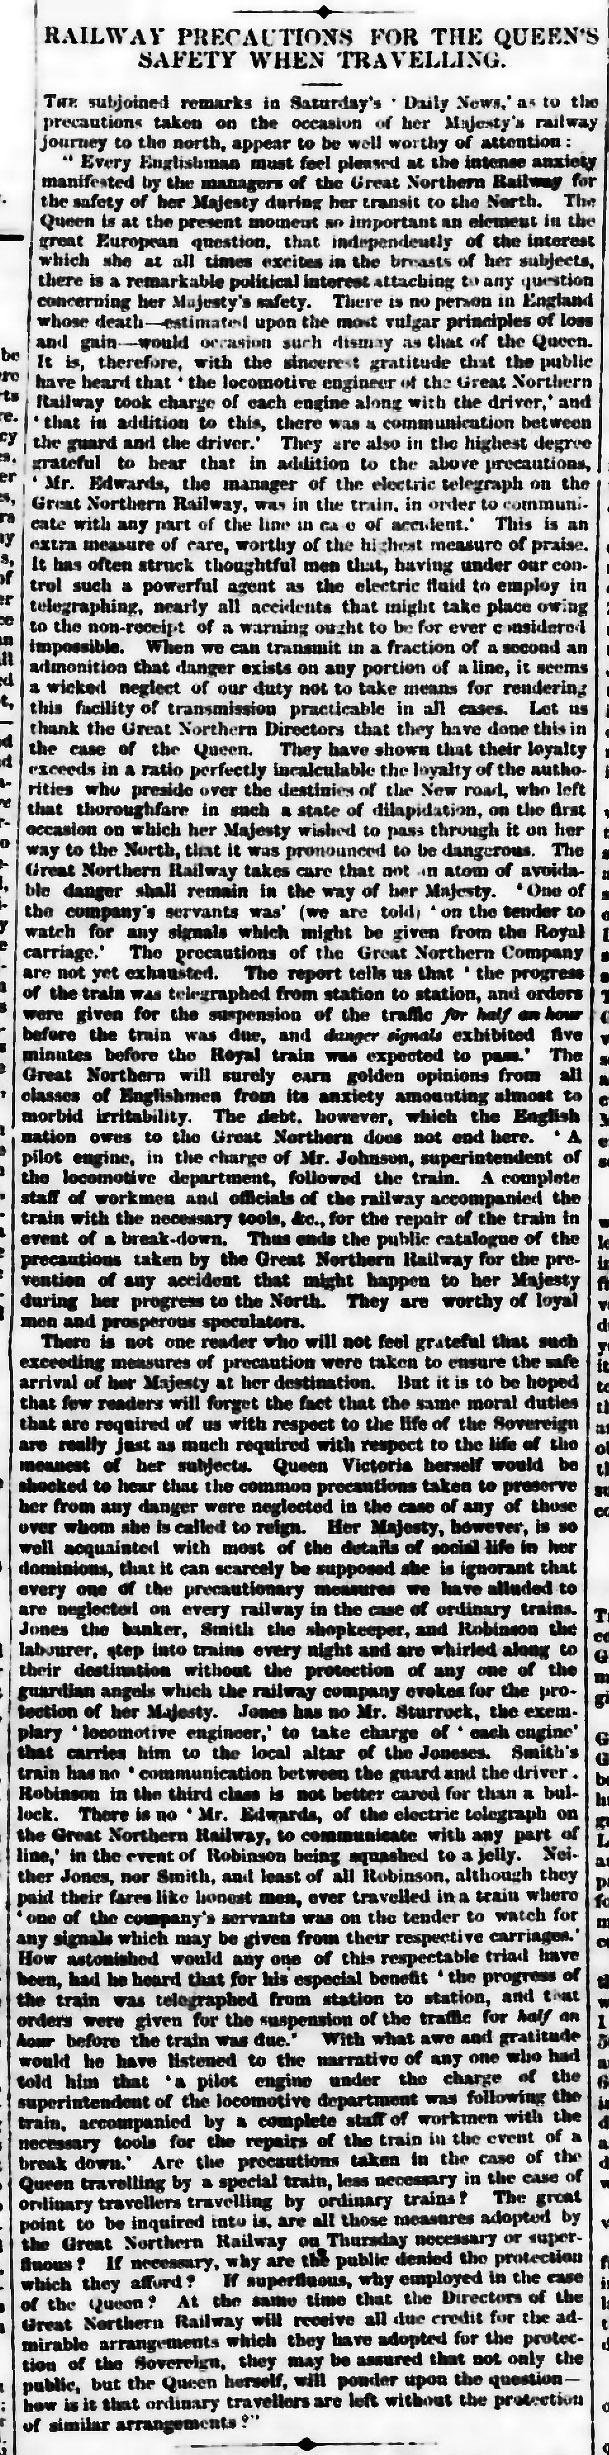 The Chester Chronicle 23rd September 1854, page 2 From The British Newspaper Archive Image © THE BRITISH LIBRARY BOARD. ALL RIGHTS RESERVED